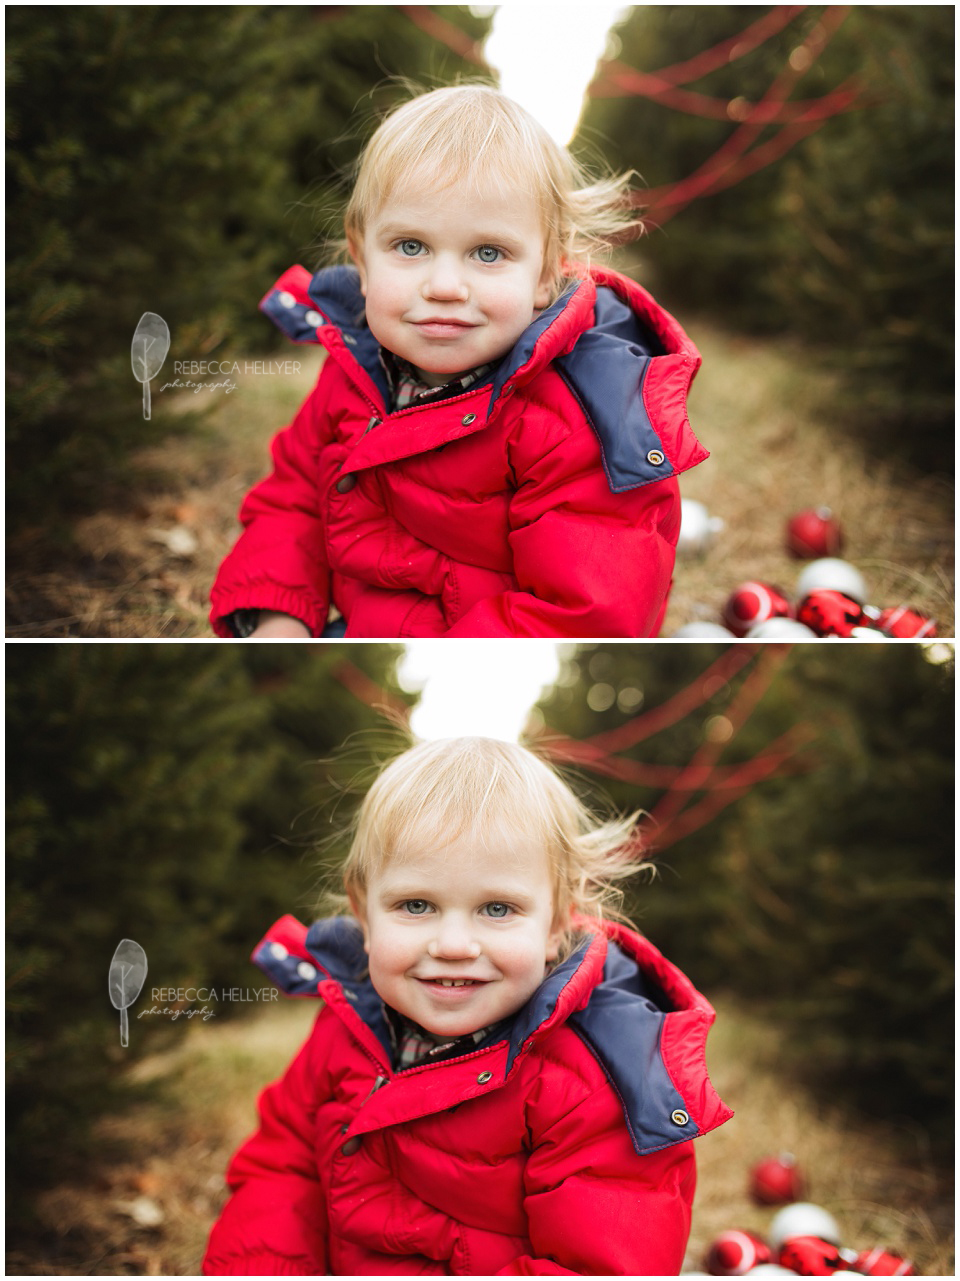 Christmas Tree Farm Mini-Sessions | Chicago Child Photographer | Rebecca Hellyer Photography